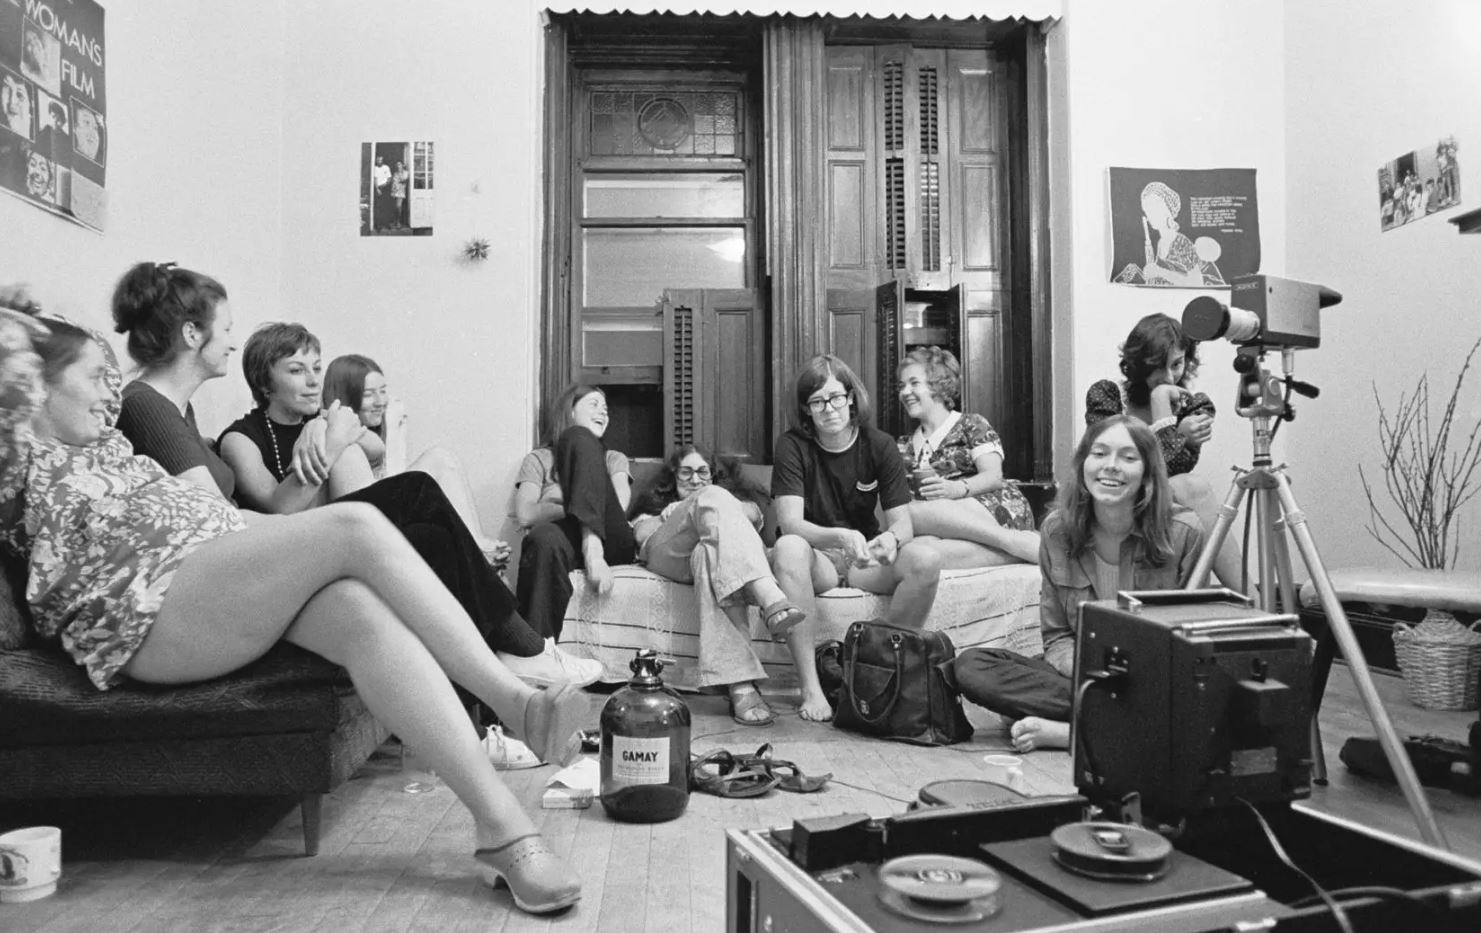 A black and white photo of a group of women sitting and laughing together in a room with a video camera setup, capturing a casual and joyful moment.